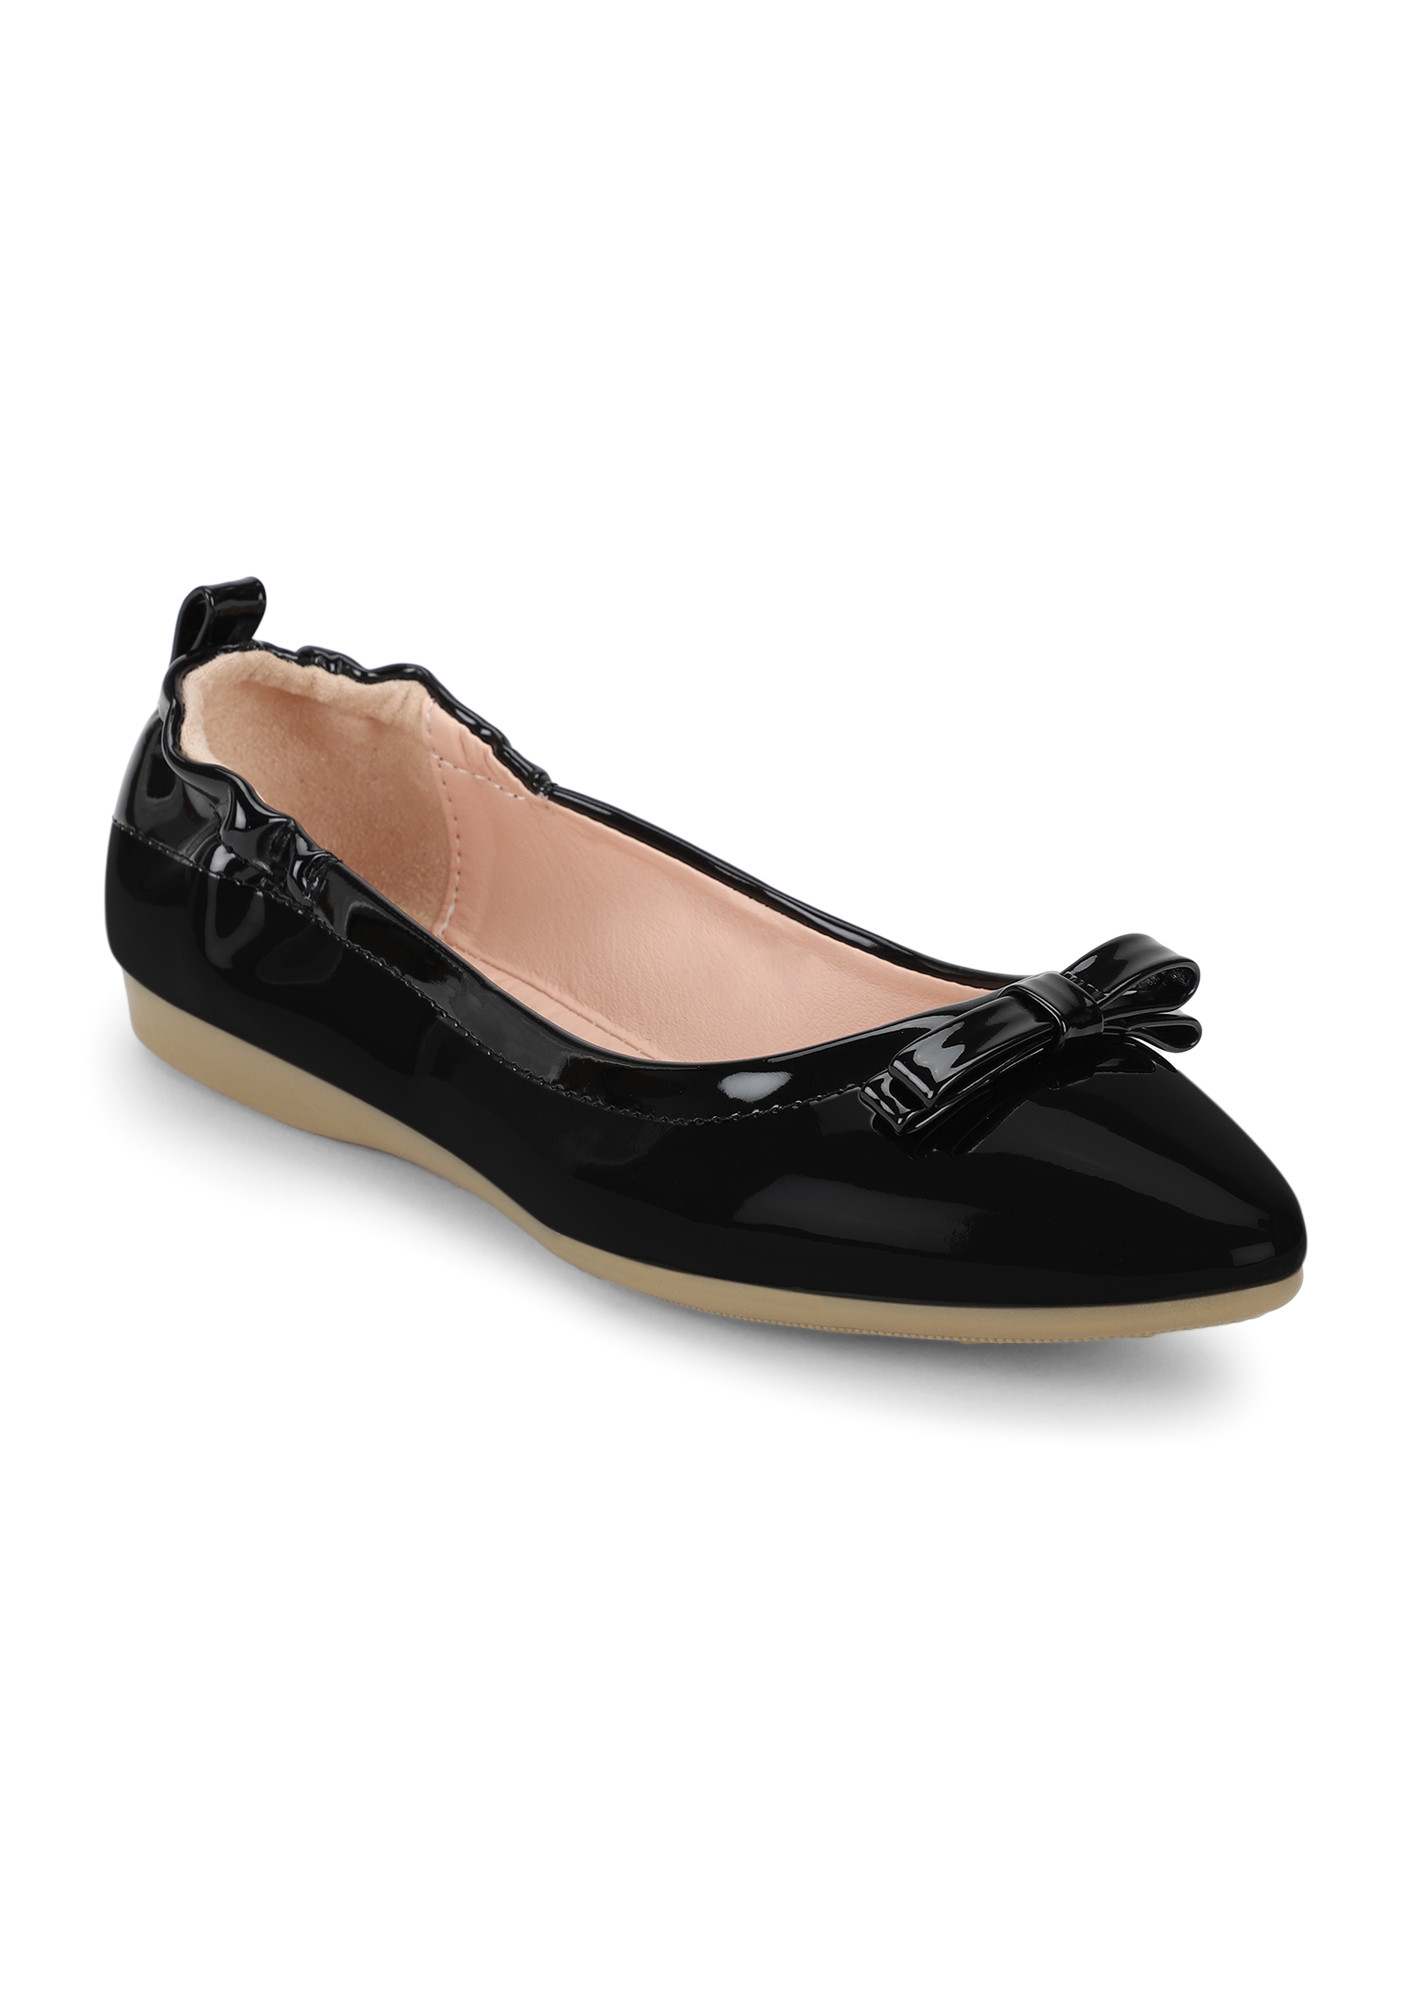 BOWS ON MY TOES BLACK BALLET FLATS